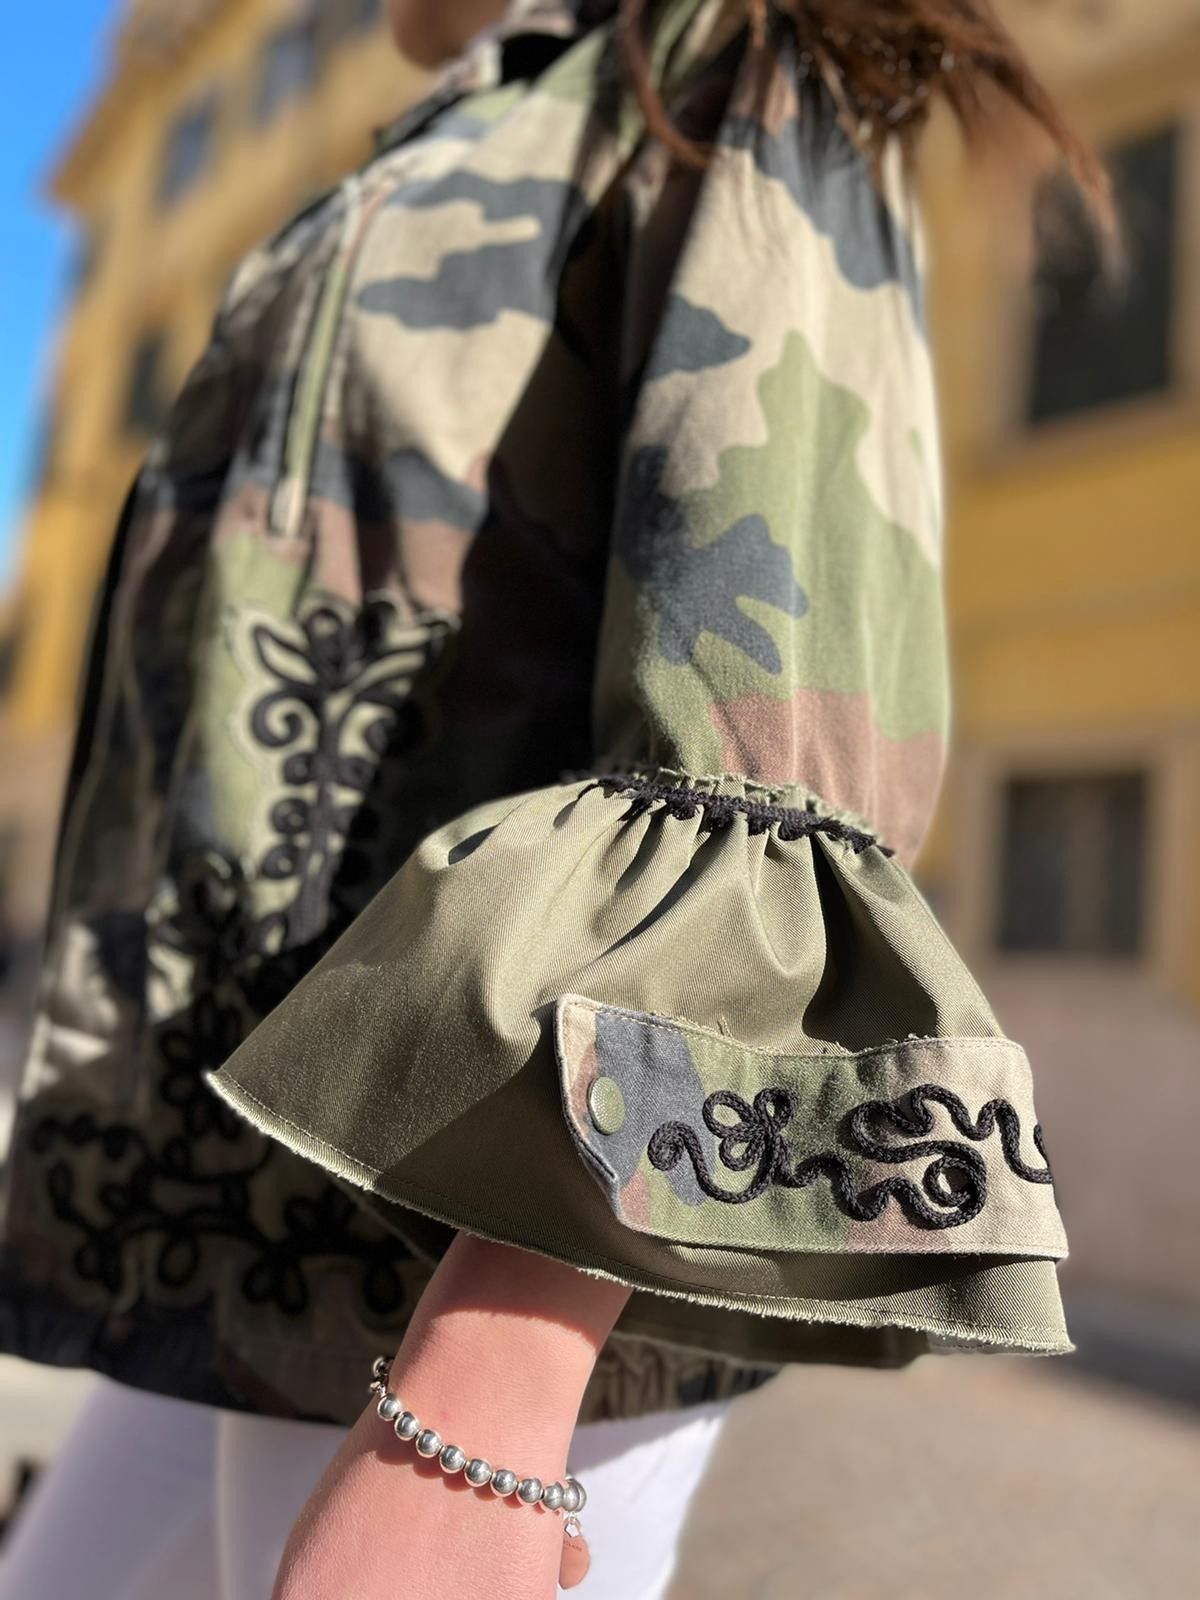 Giacca Militare Camouflage History Repeats